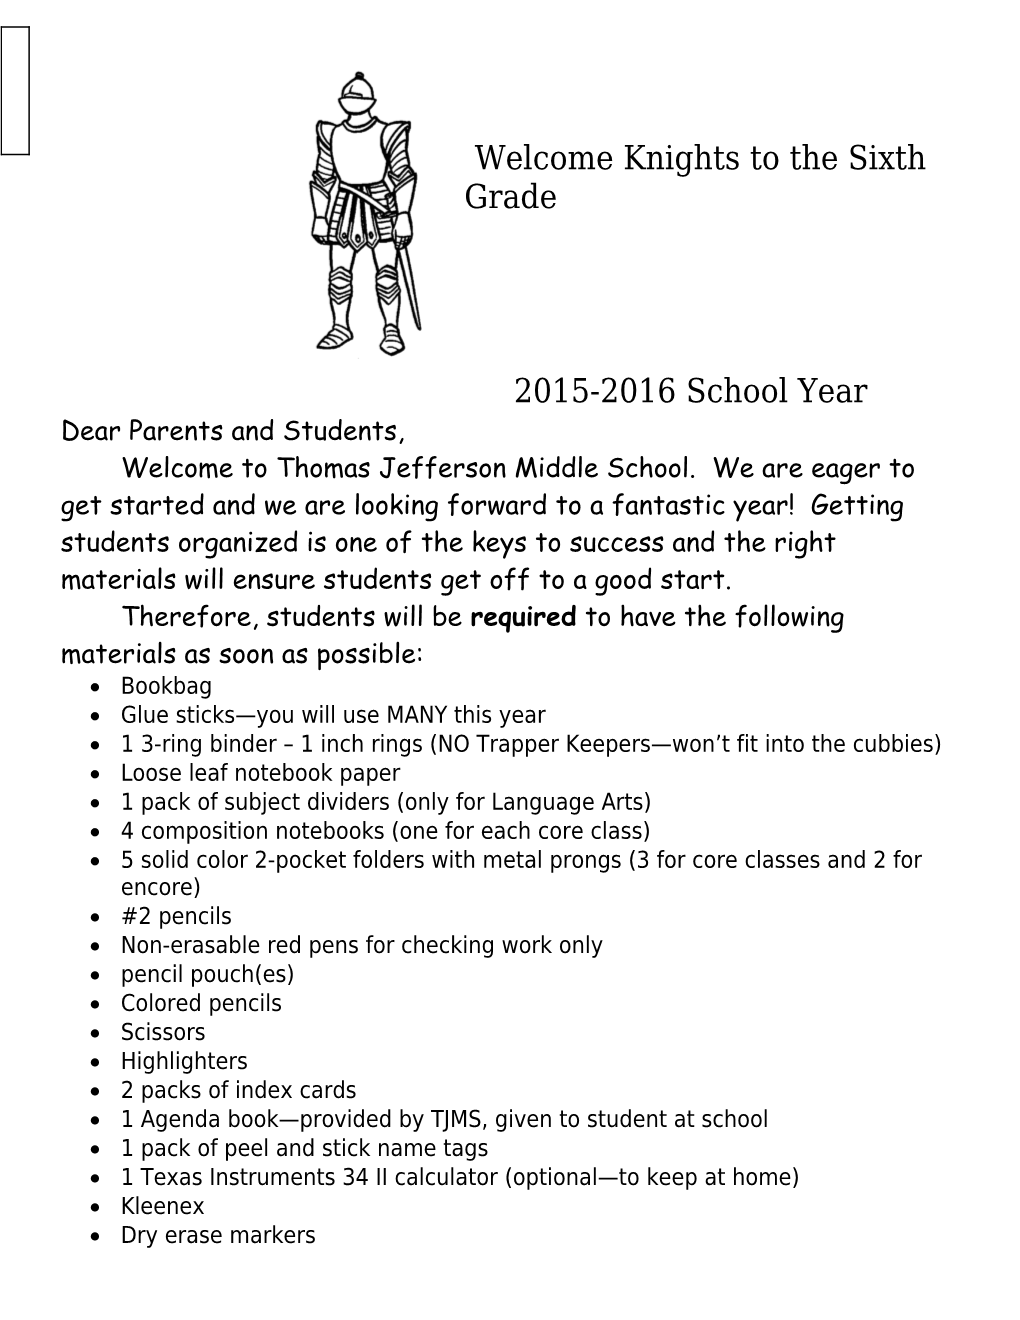 Welcome Knights to the Sixth Grade